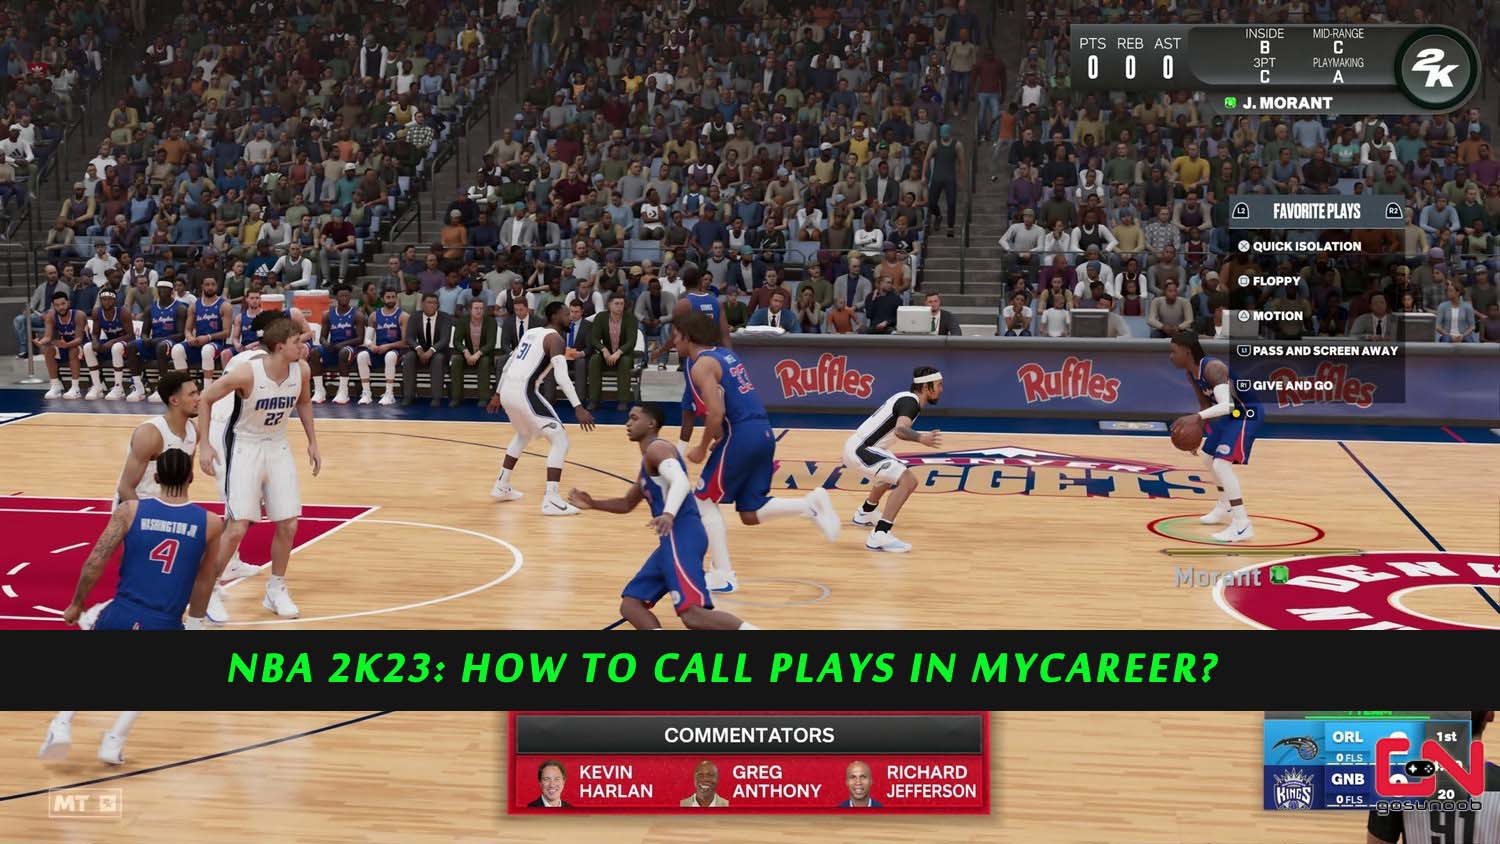 NBA 2K23: How to Call Plays in MyCareer?